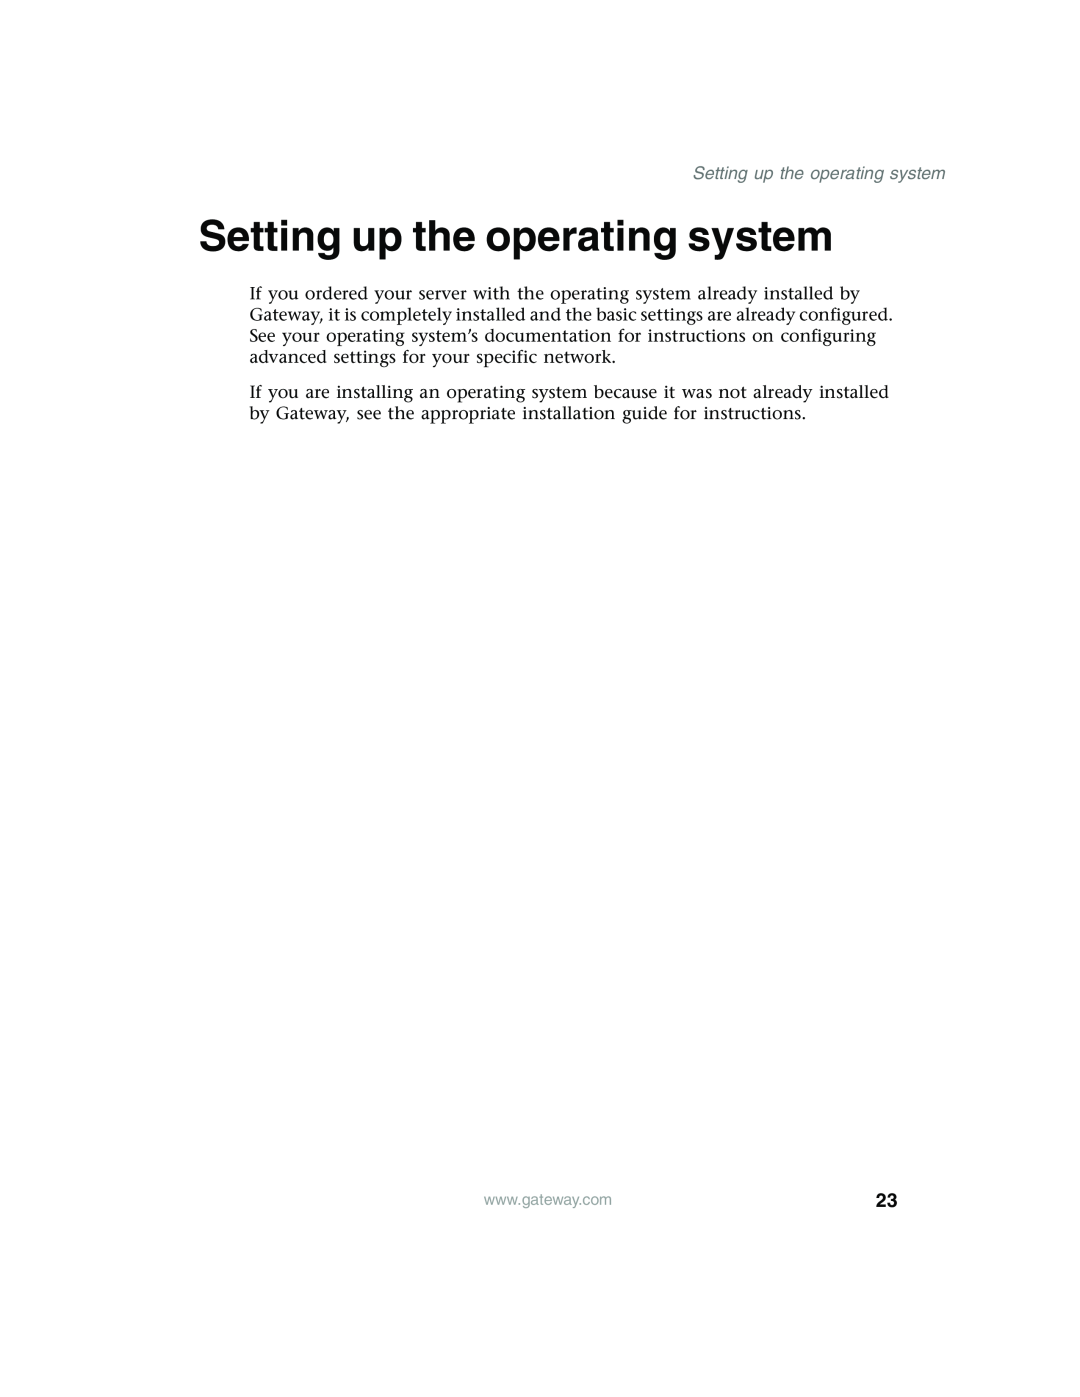 Gateway 955 manual Setting up the operating system 